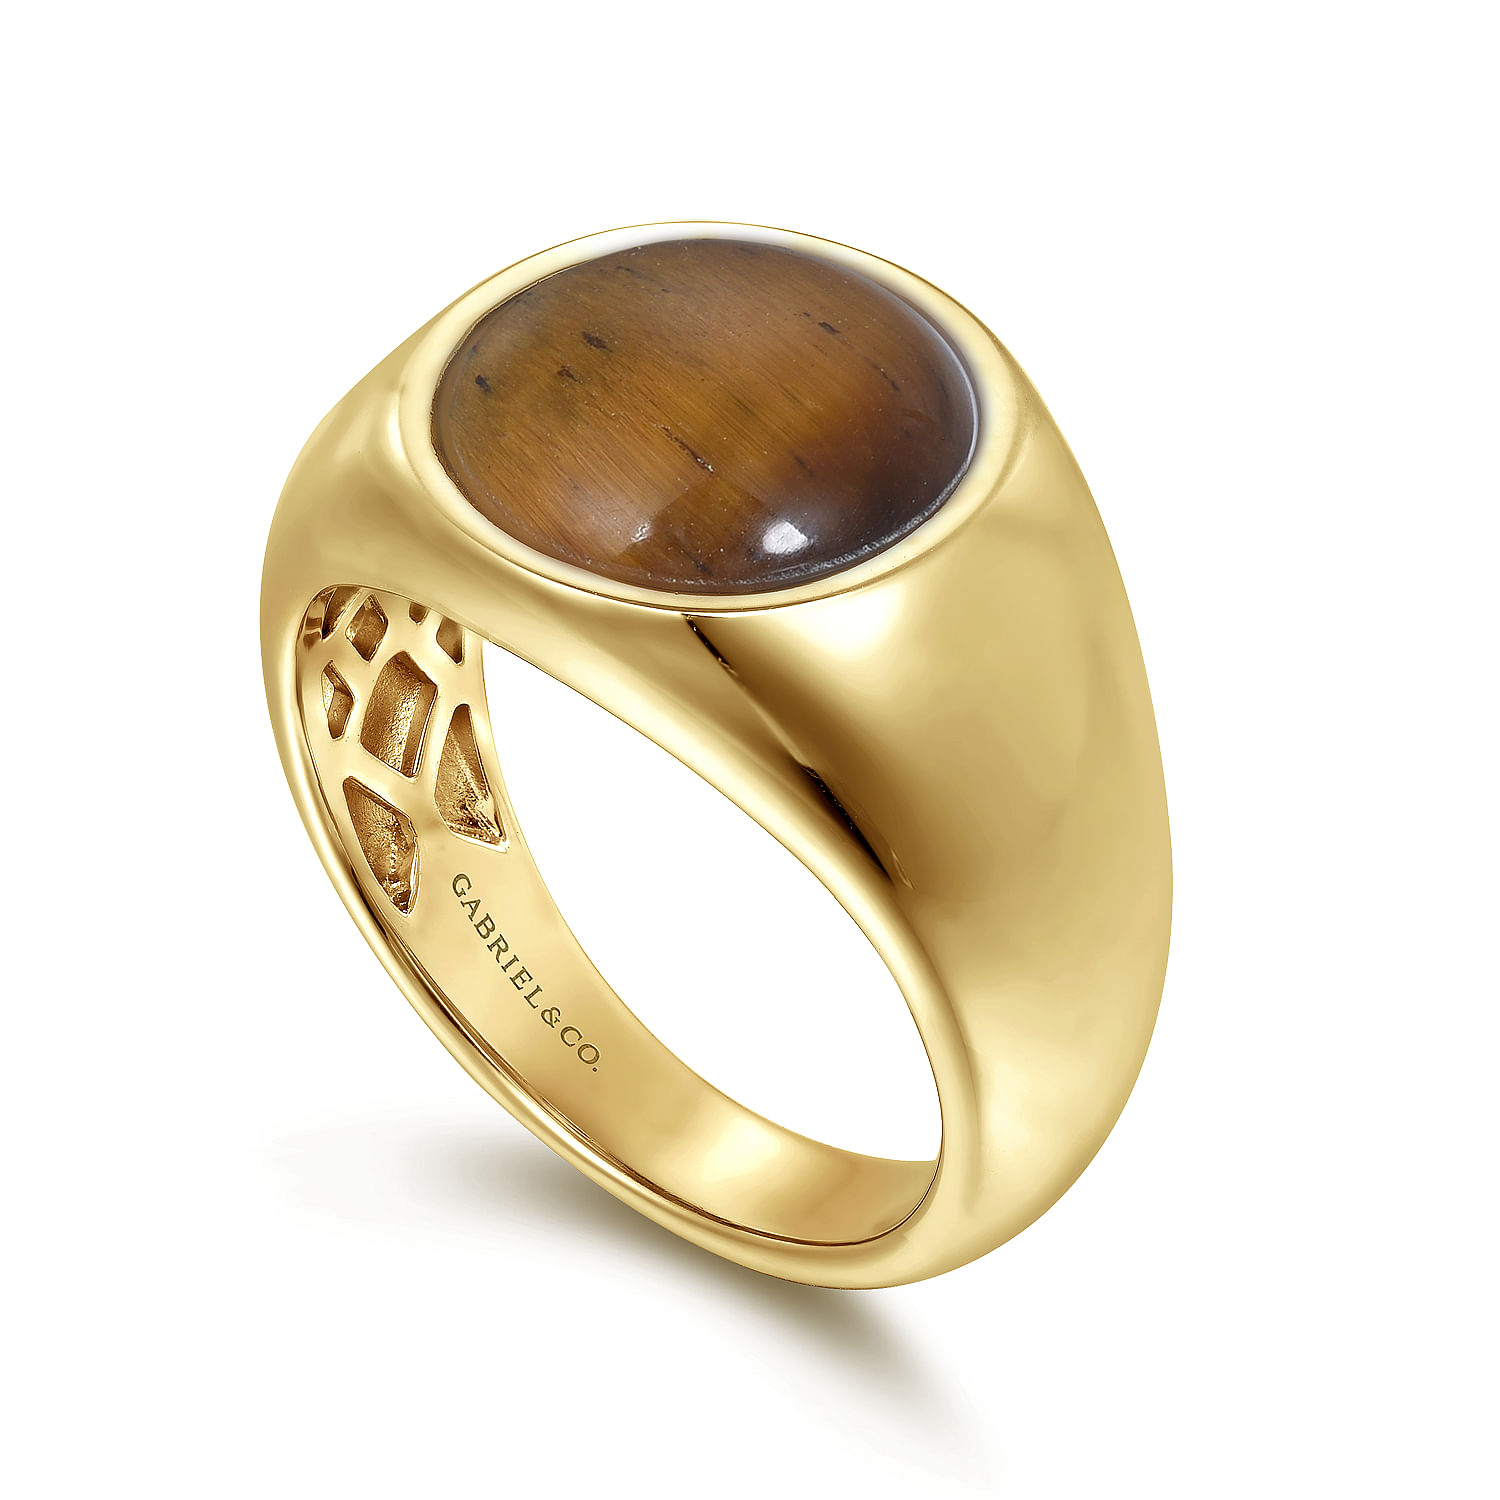 Wide 14K Yellow Gold Signet Ring with Tiger Eye Stone in Sand Blast Finish